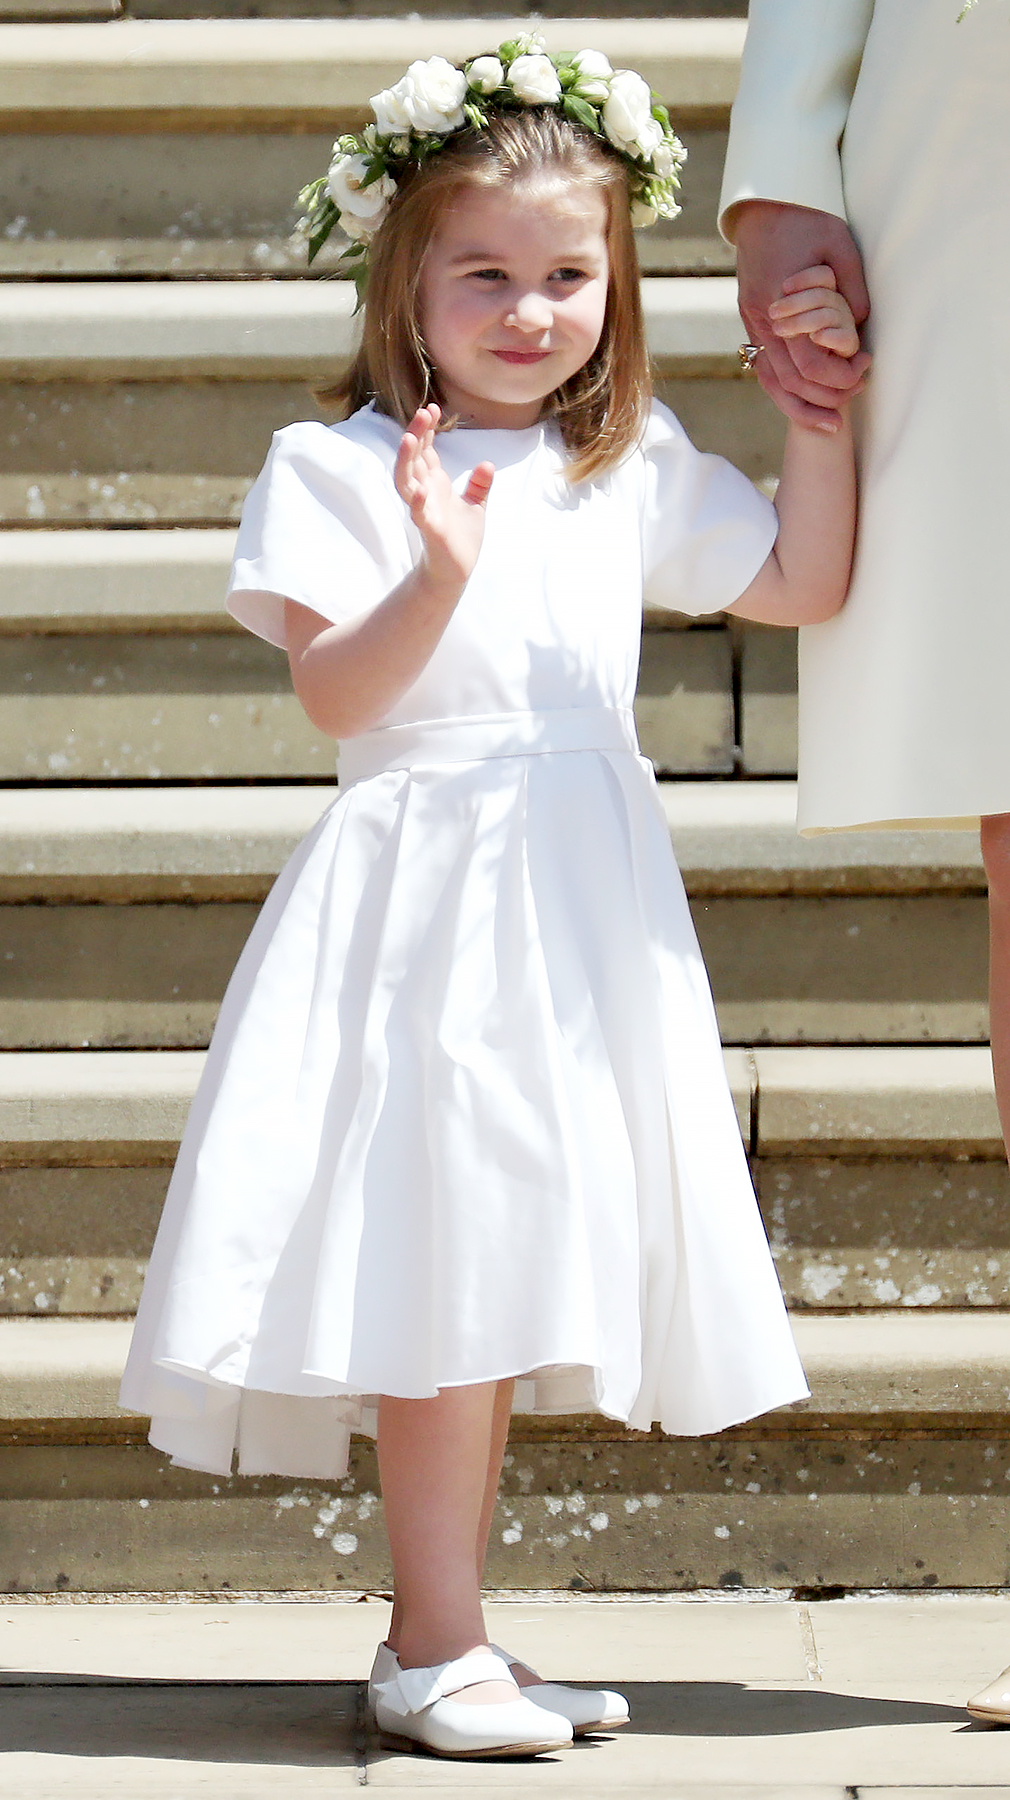 Princess Charlotte of Cambridge’s Royal Life in Photos All My Family Care